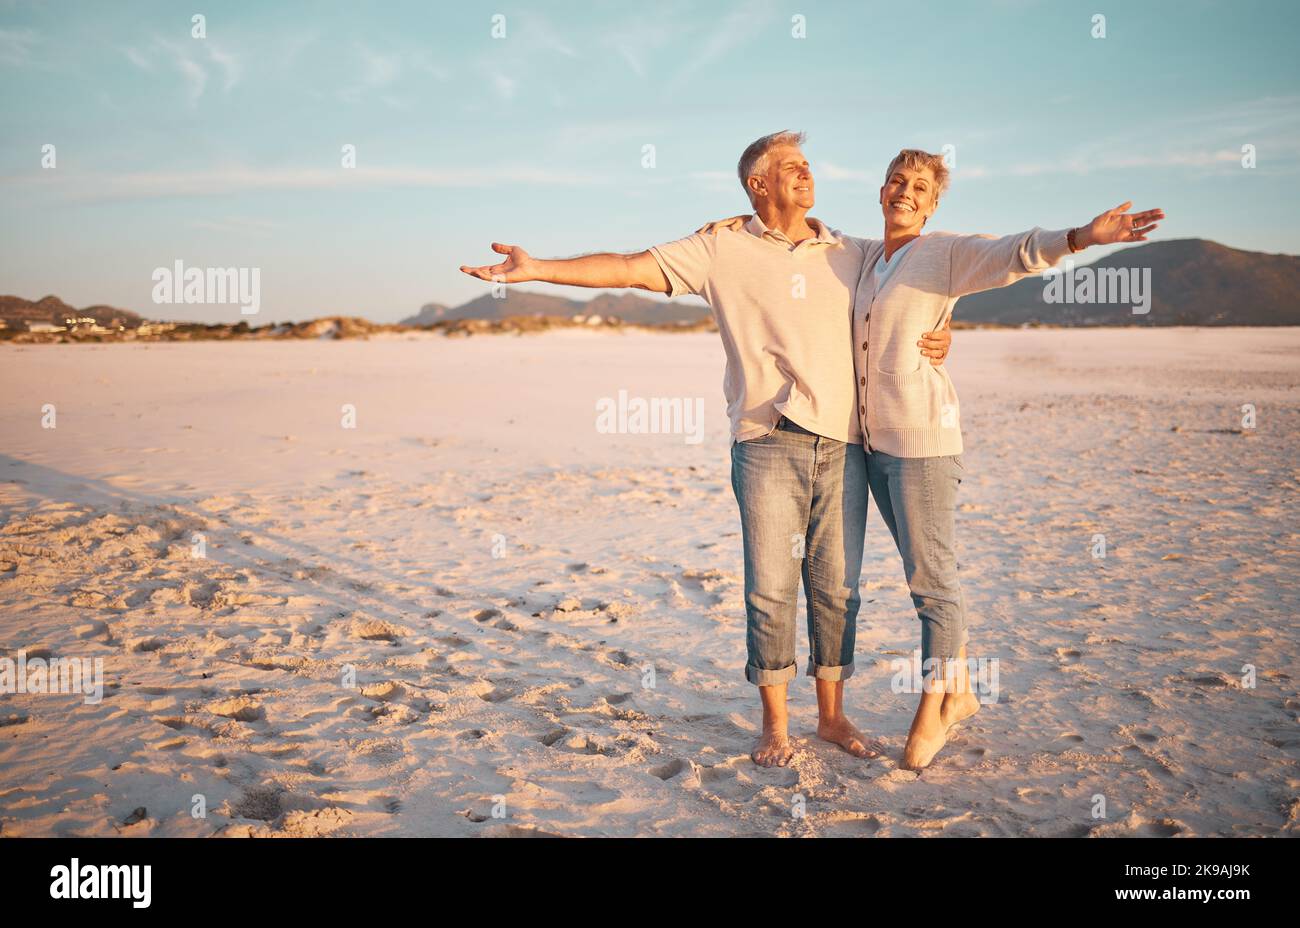 Love, beach and summer with a senior couple standing together on the sand on a sunny day. Travel, vacation and romance with a n elderly man and woman Stock Photo